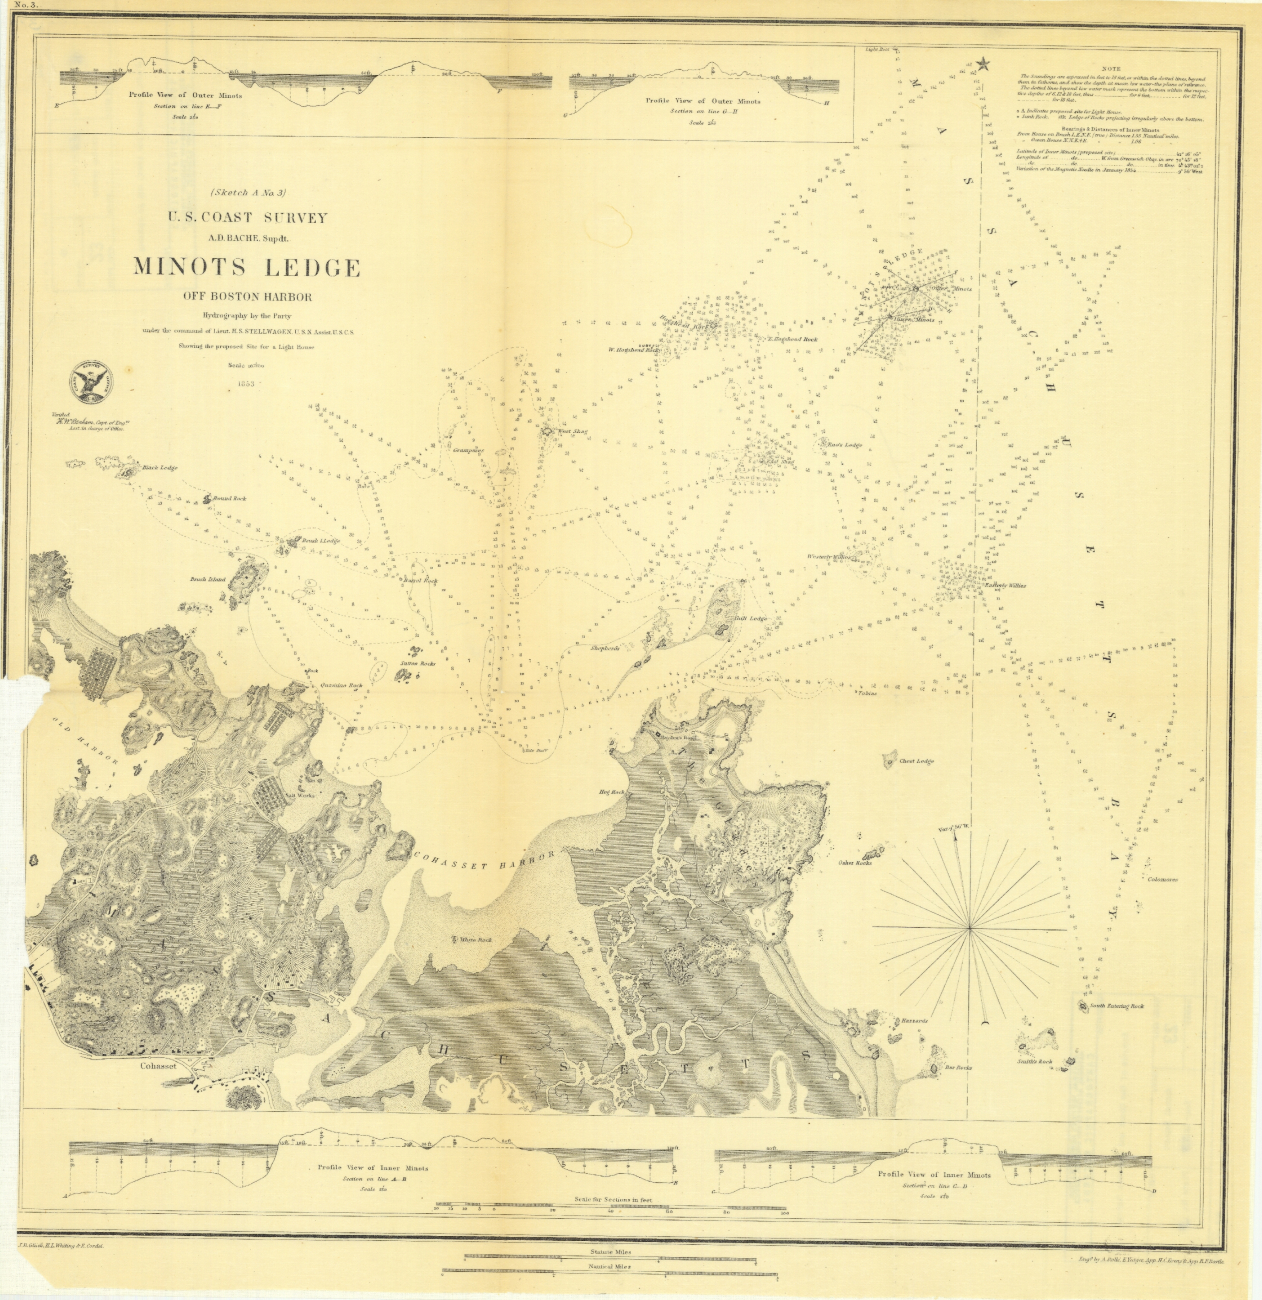 Sketch A Survey of Minots Ledge off Boston Harbor, showing the sitefor a Light House